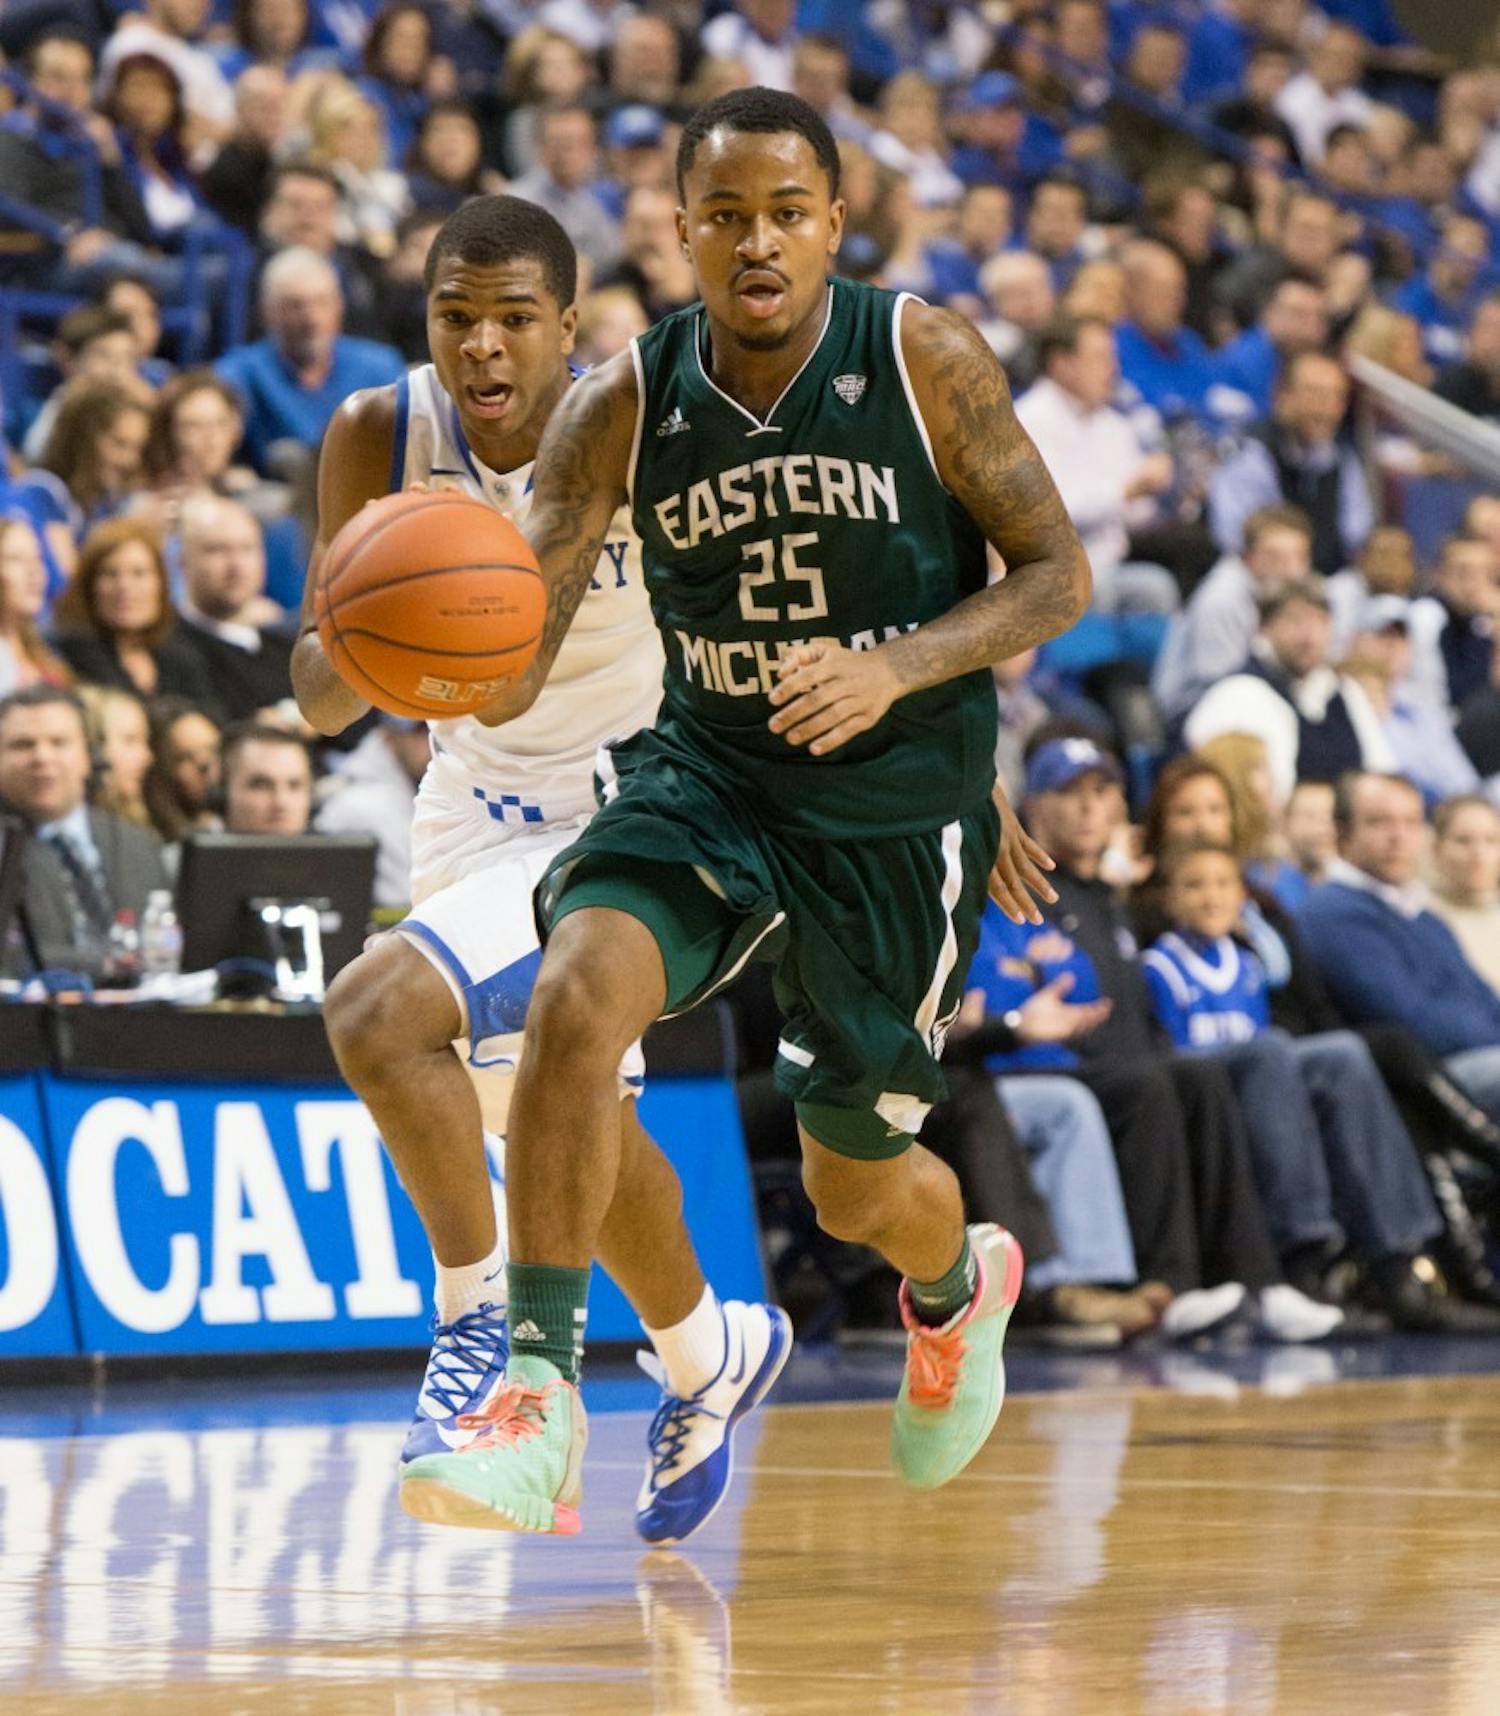 EMU guard Darell Combs (25) led the way with a career high 23 points in Eastern Michigan's 81-63 loss to Kentucky Wednesday afternoon in Lexington, Kentucky.